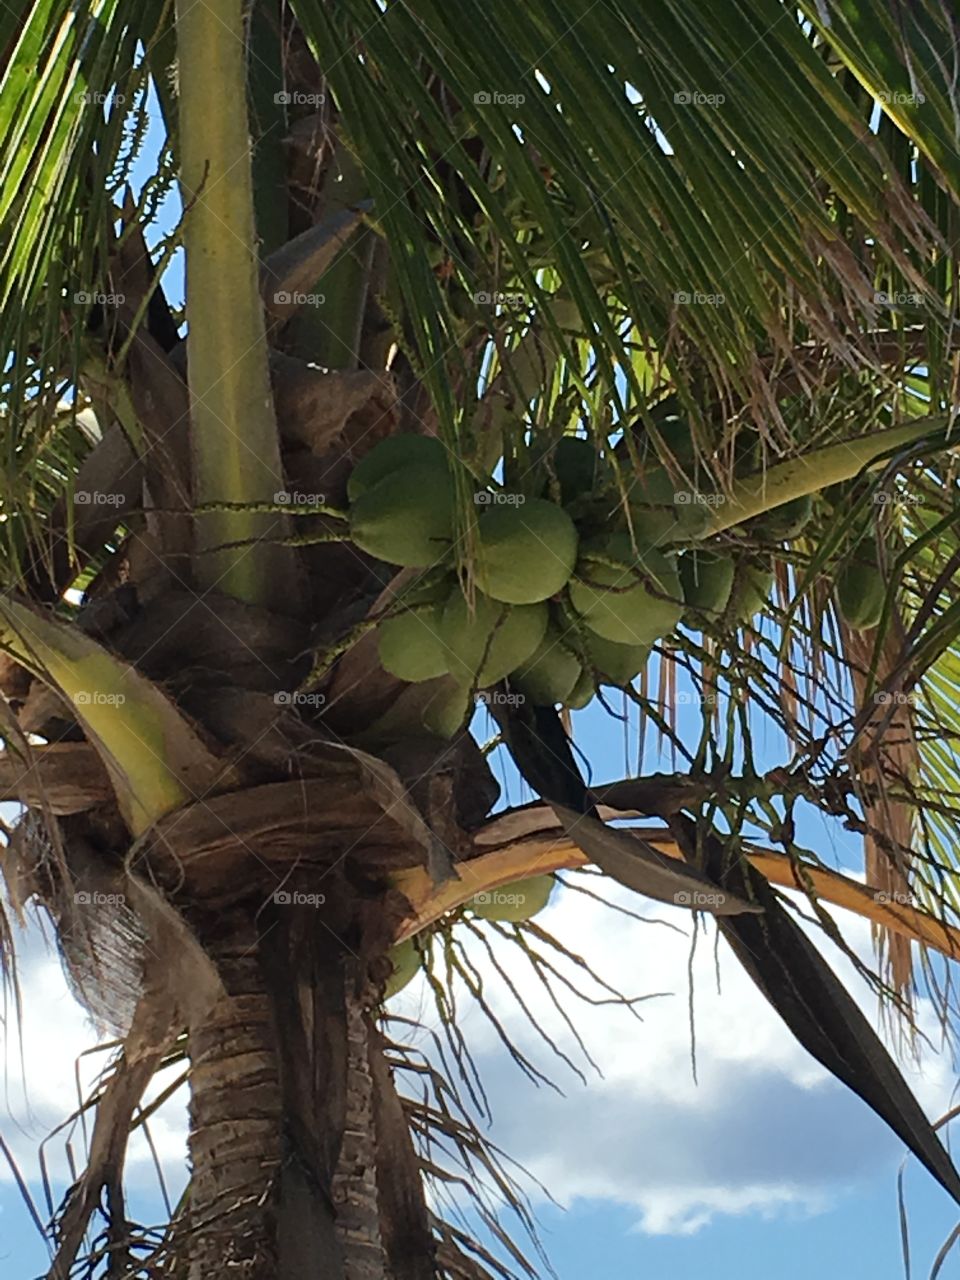 Coconuts in the Bahamas 